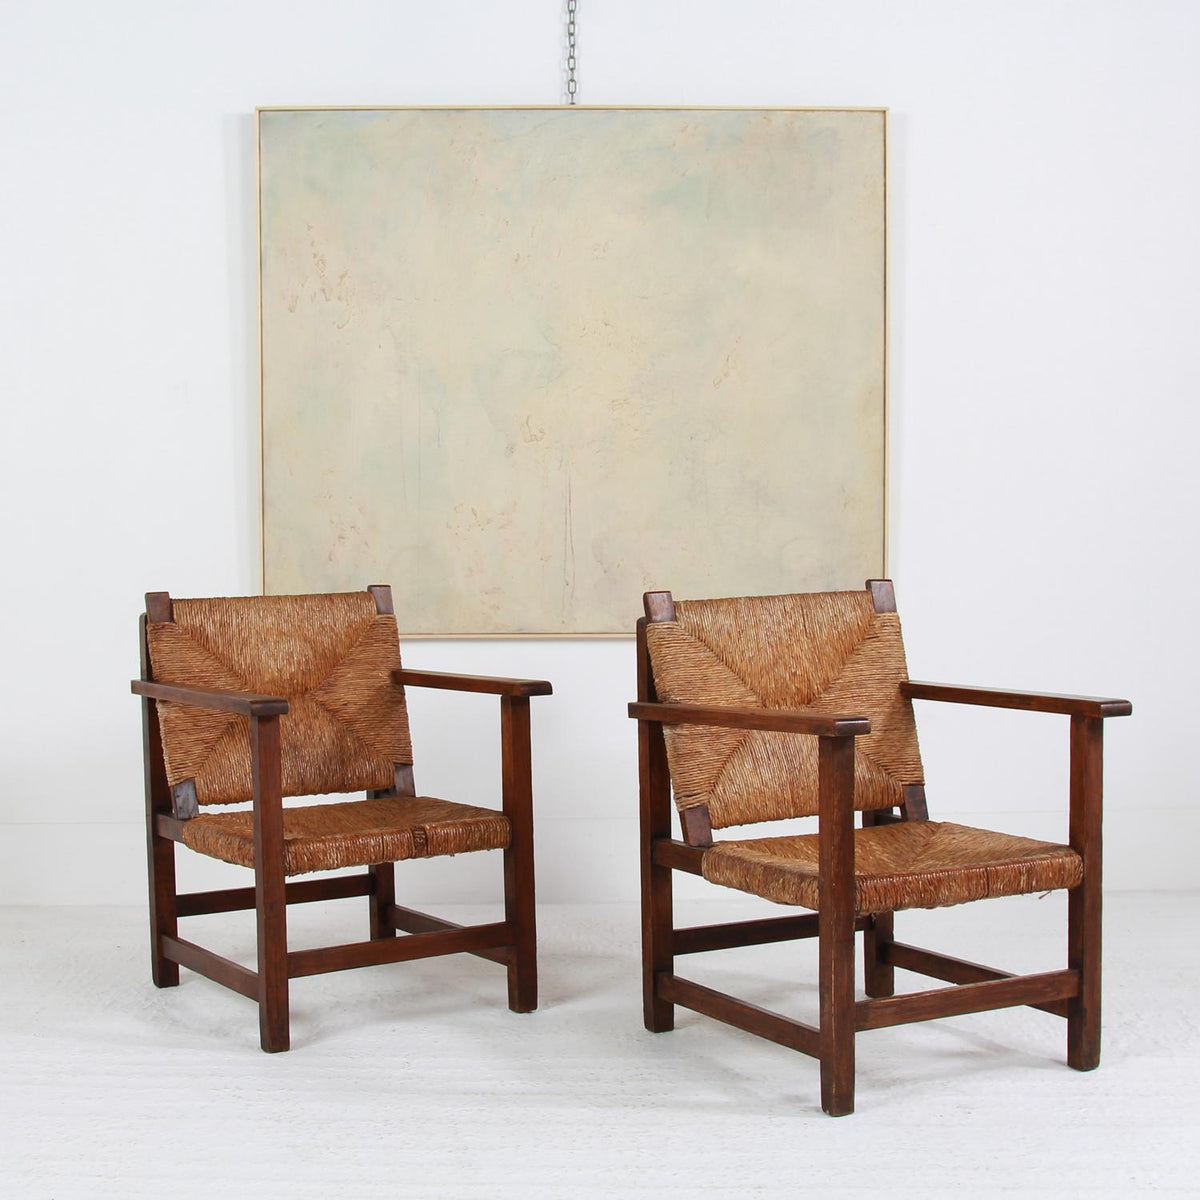 Pair of Rustic Spanish Lounge Chairs in Wood and Straw